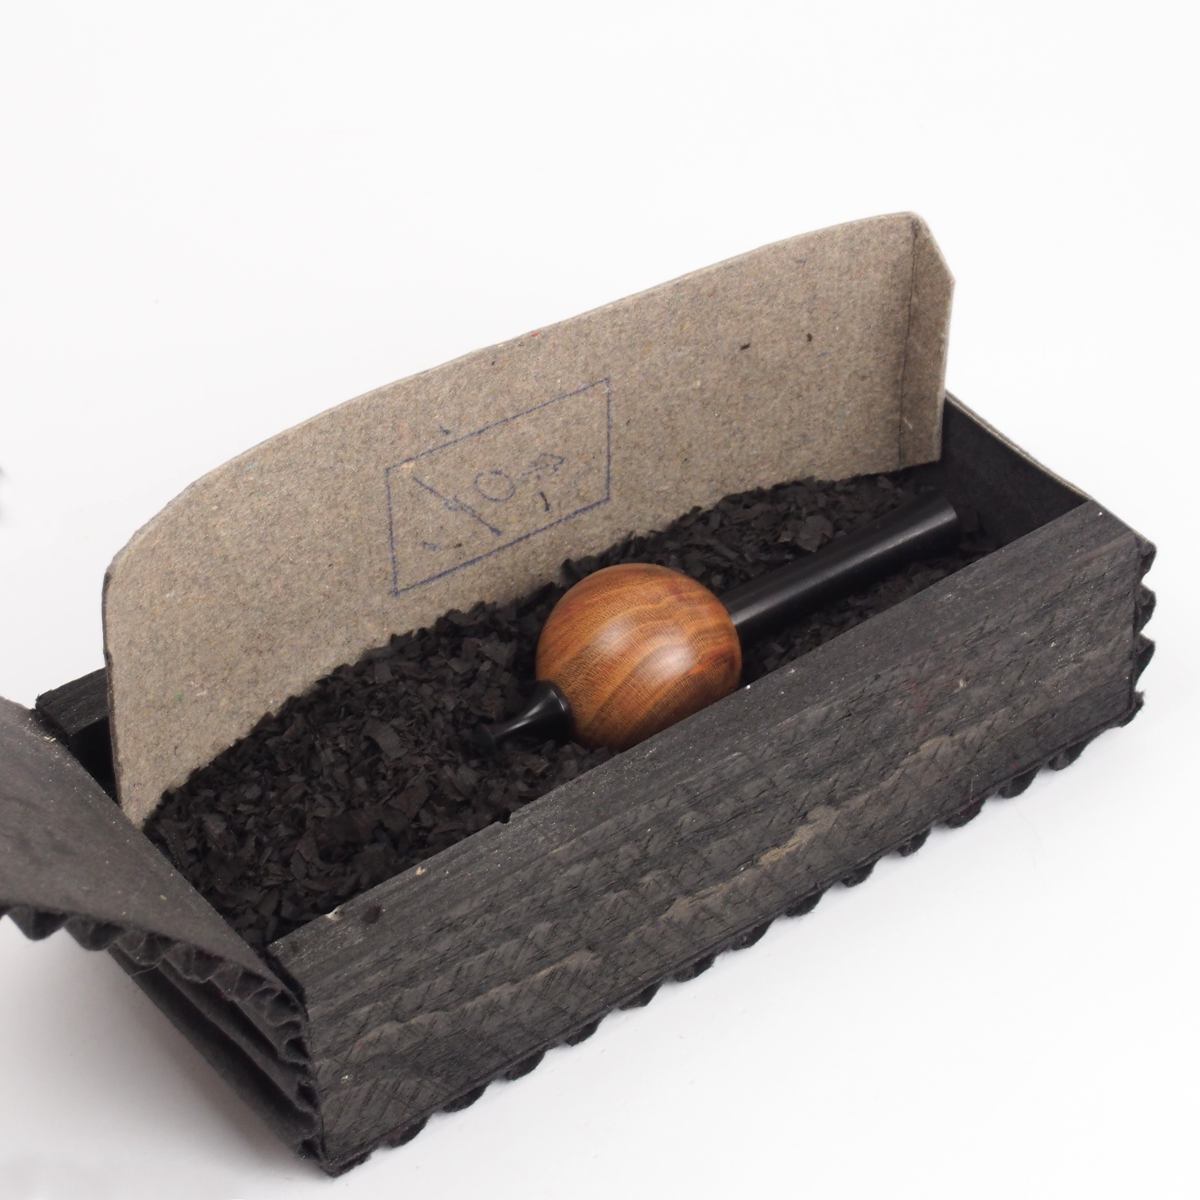 The Spinning Top comes in a gift box made of wood and cardboard